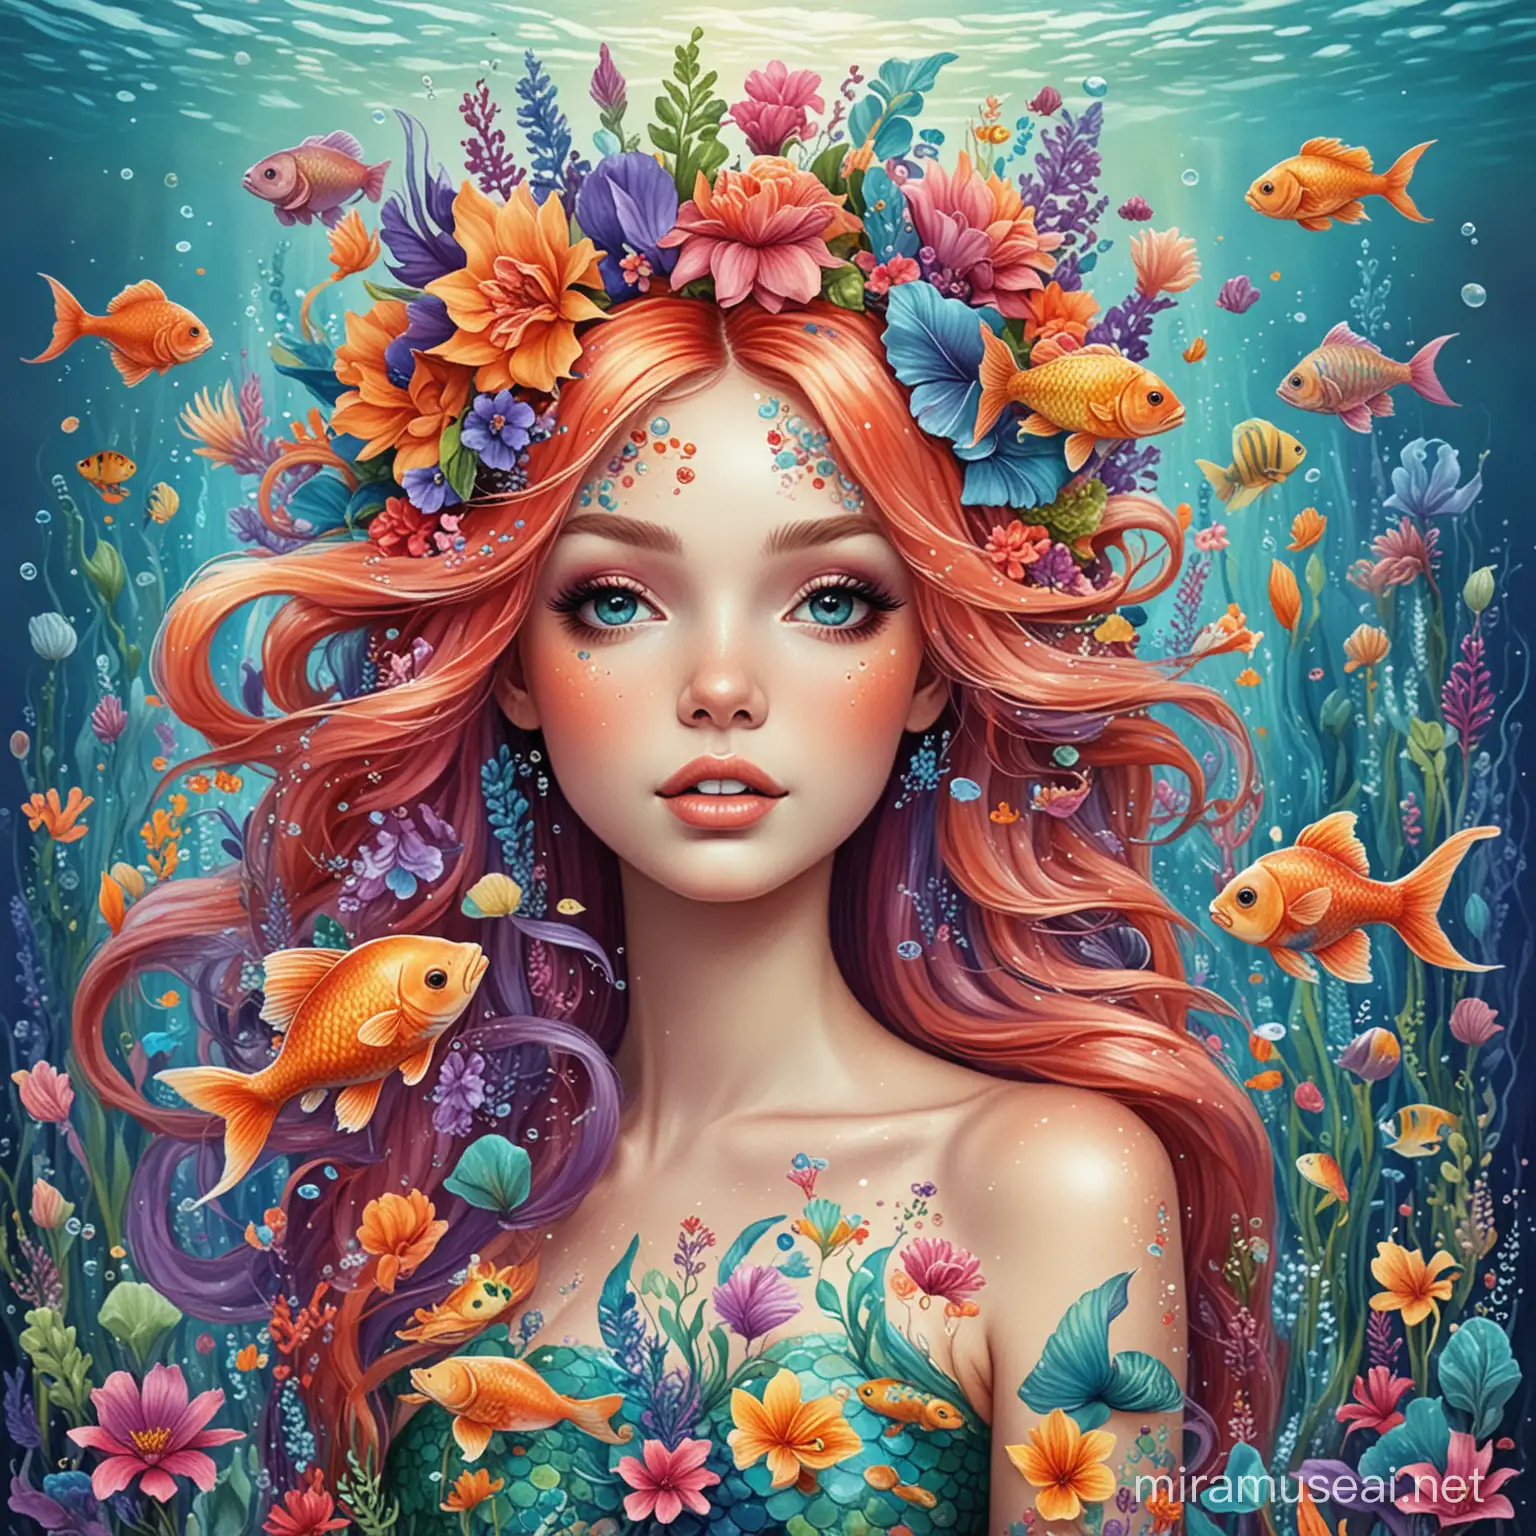 whimsical art colorful mermaid with flowers on her head, colorful fish around